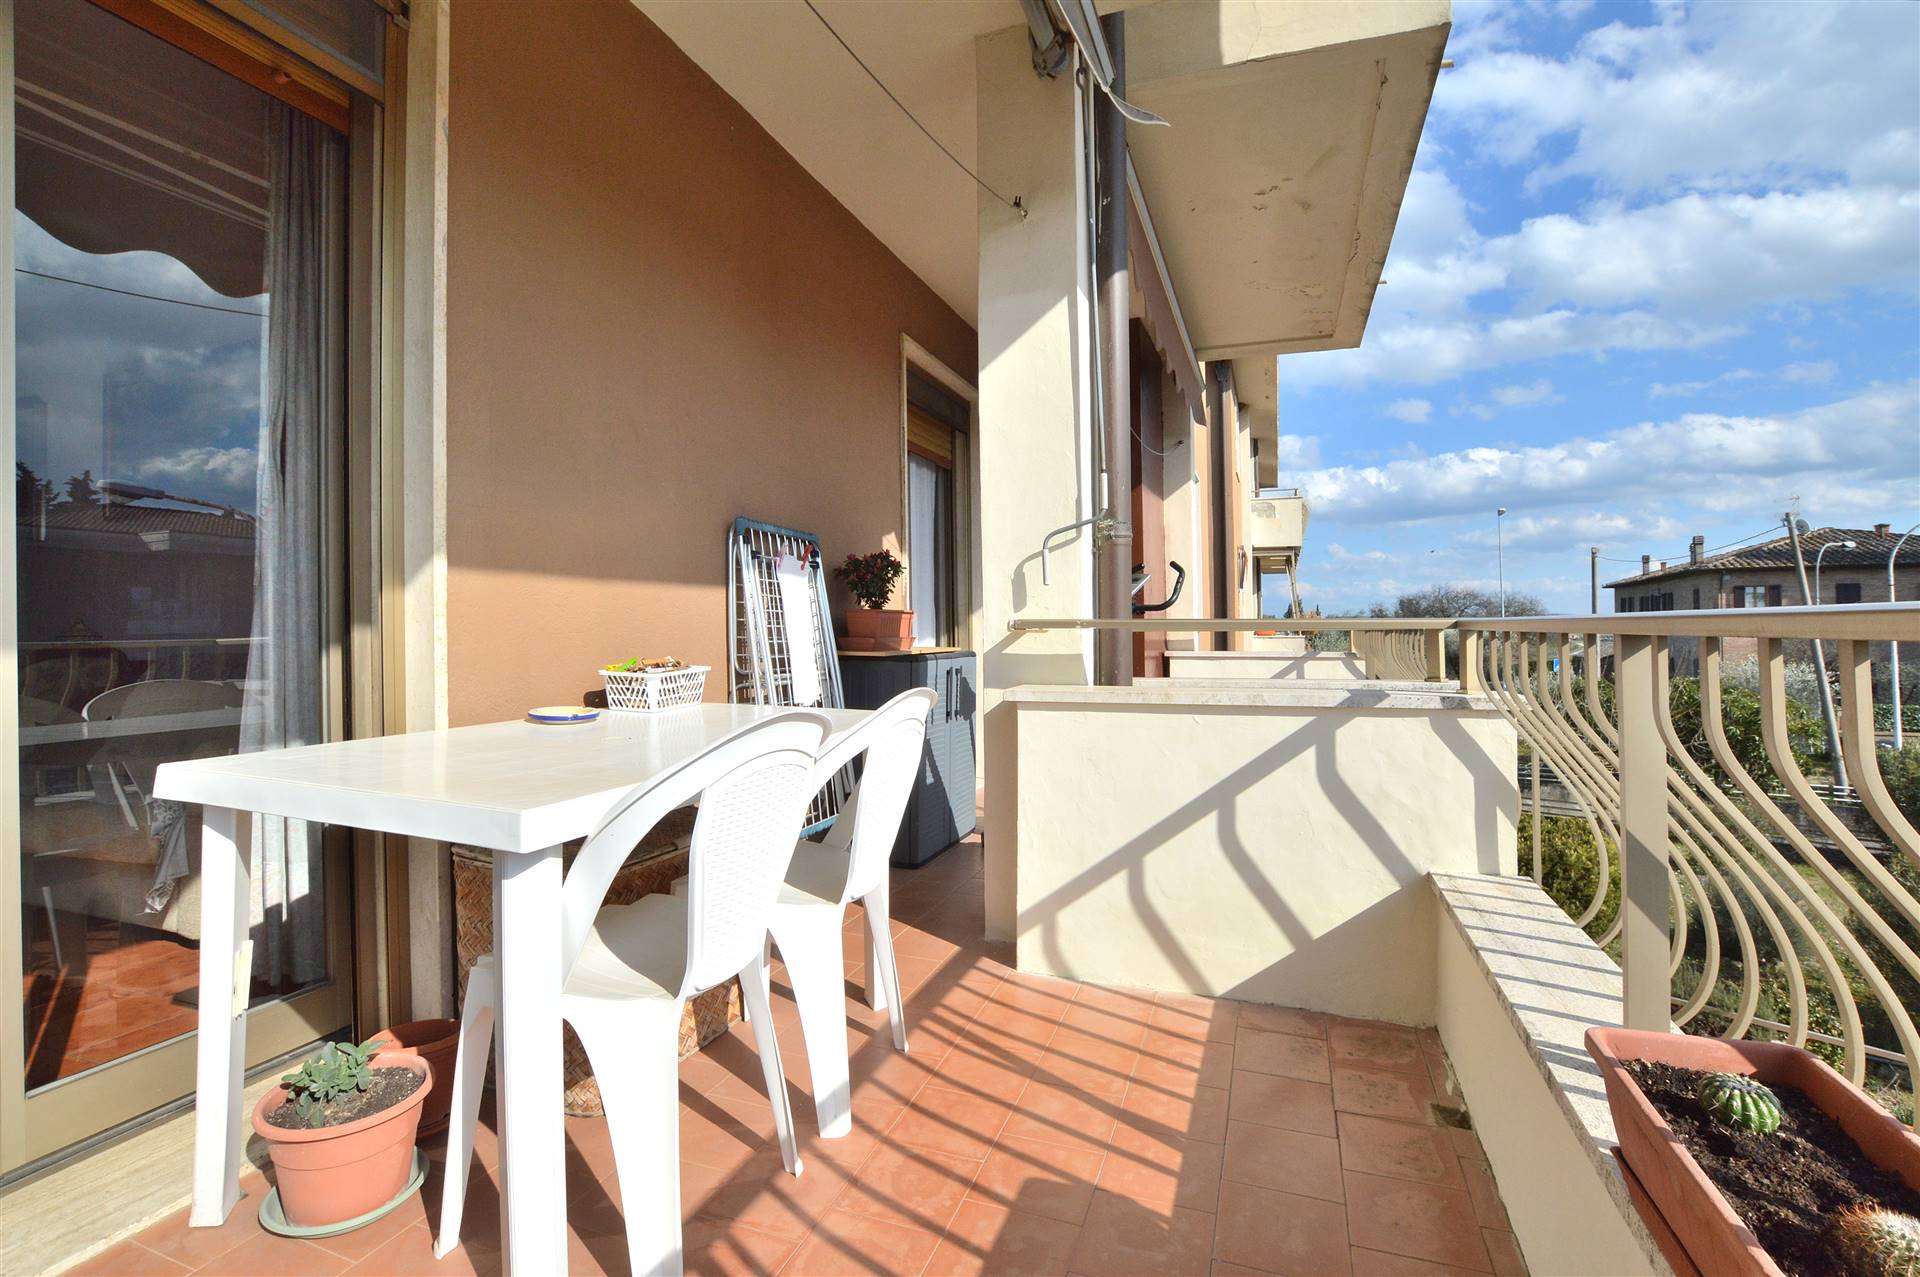 MONTEAPERTI, CASTELNUOVO BERARDENGA, Apartment for sale of 79 Sq. mt., Good condition, Heating Individual heating system, Energetic class: F, Epi: 95,